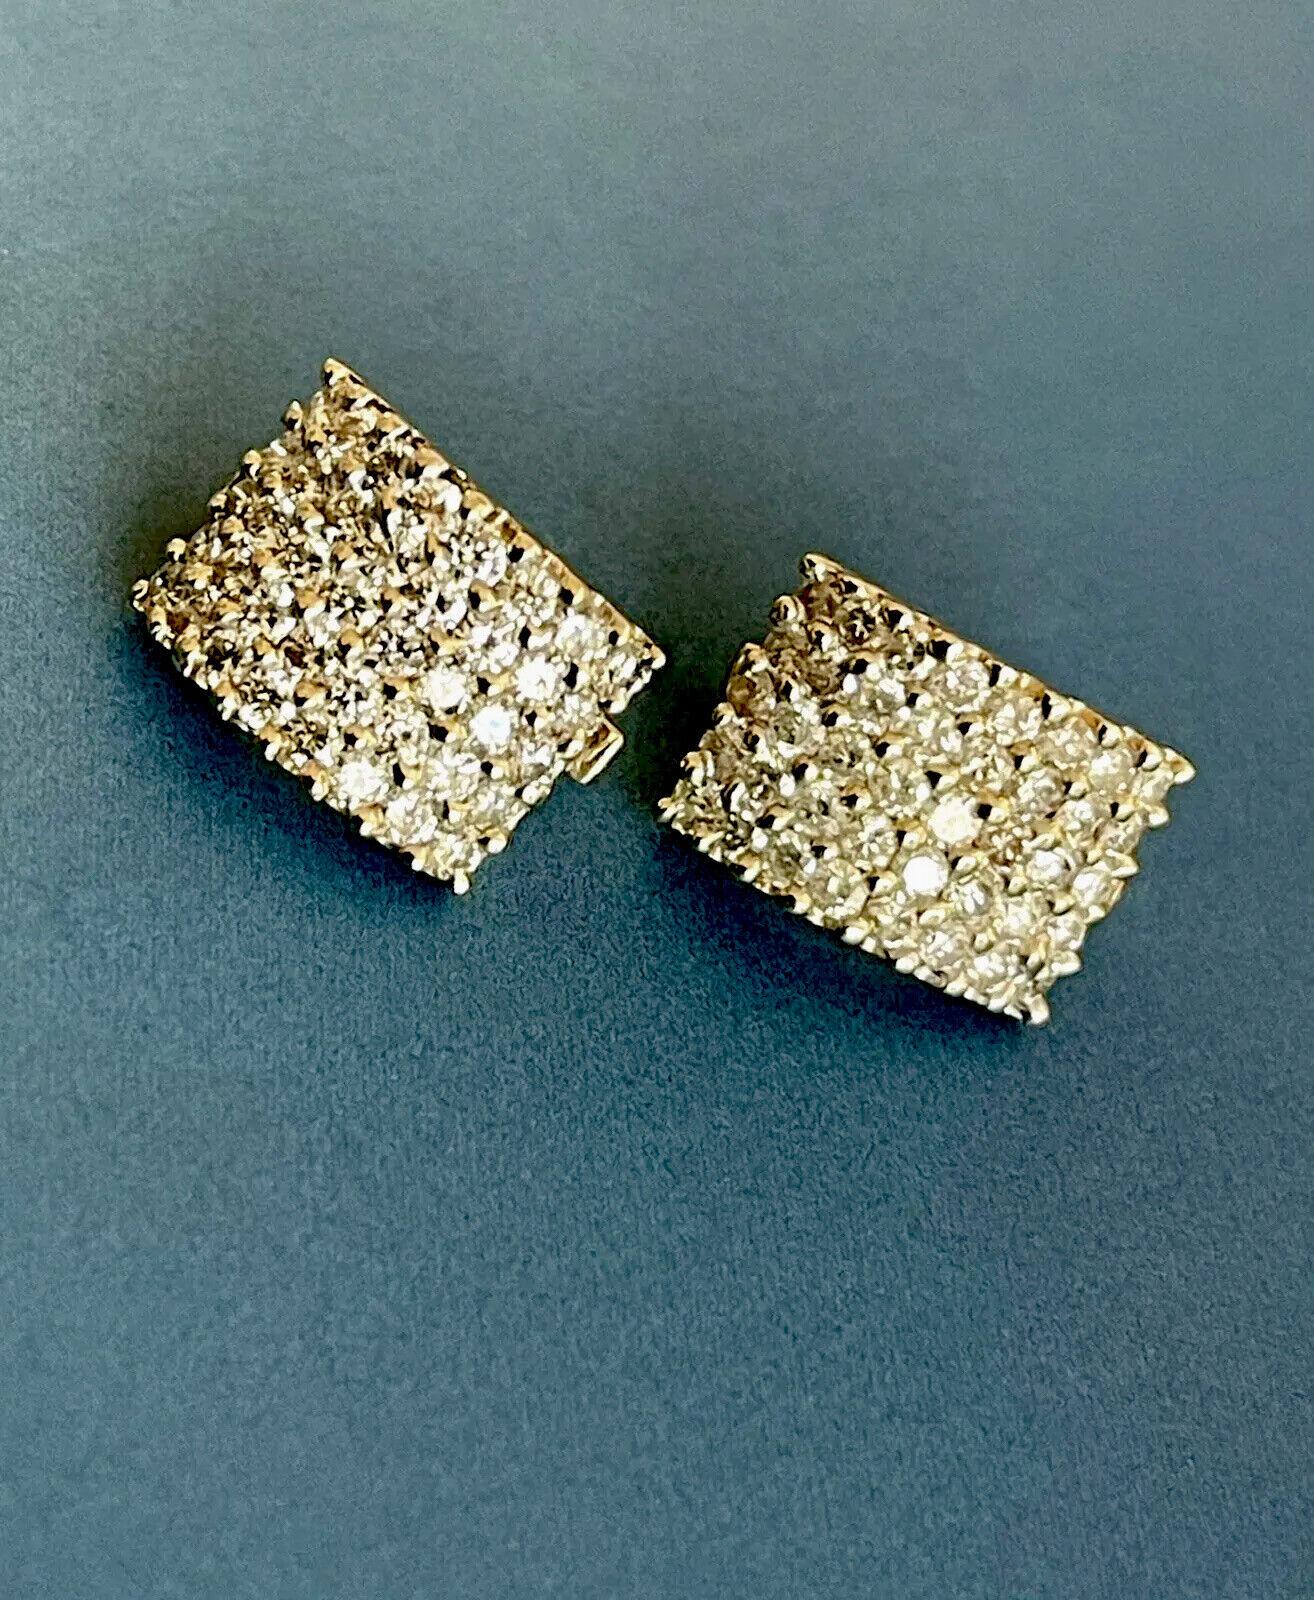 14ct yellow Gold Diamond Earrings 4ct Square Checkered leverback Studs hoop For Sale 1